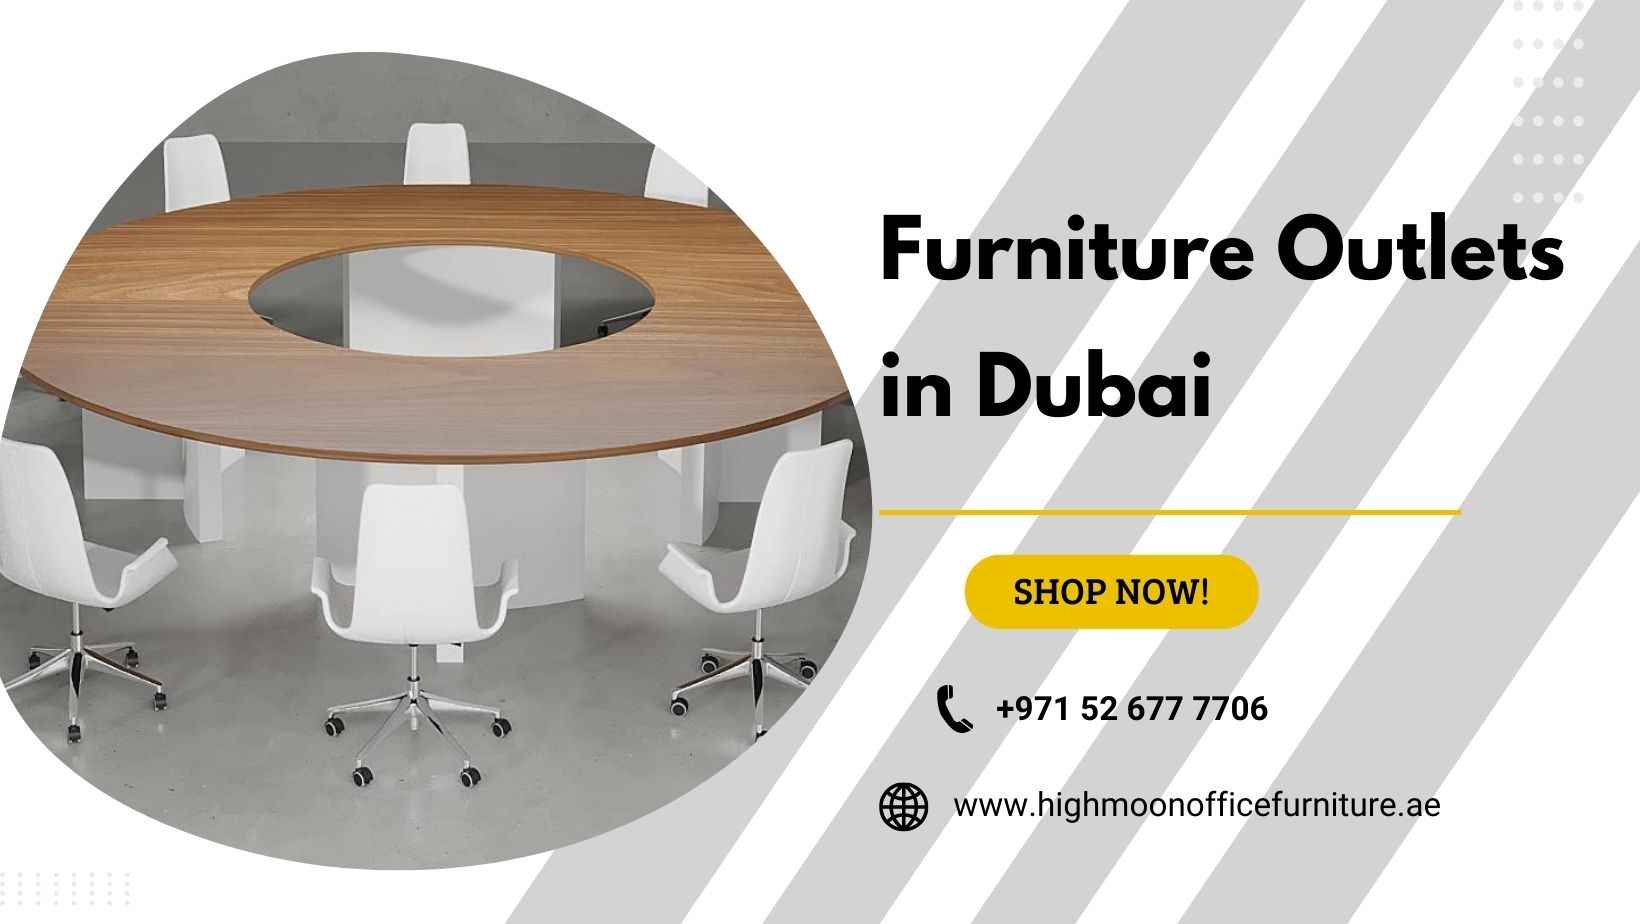 Best Furniture Outlets in Dubai – Highmoon Furniture Outlet